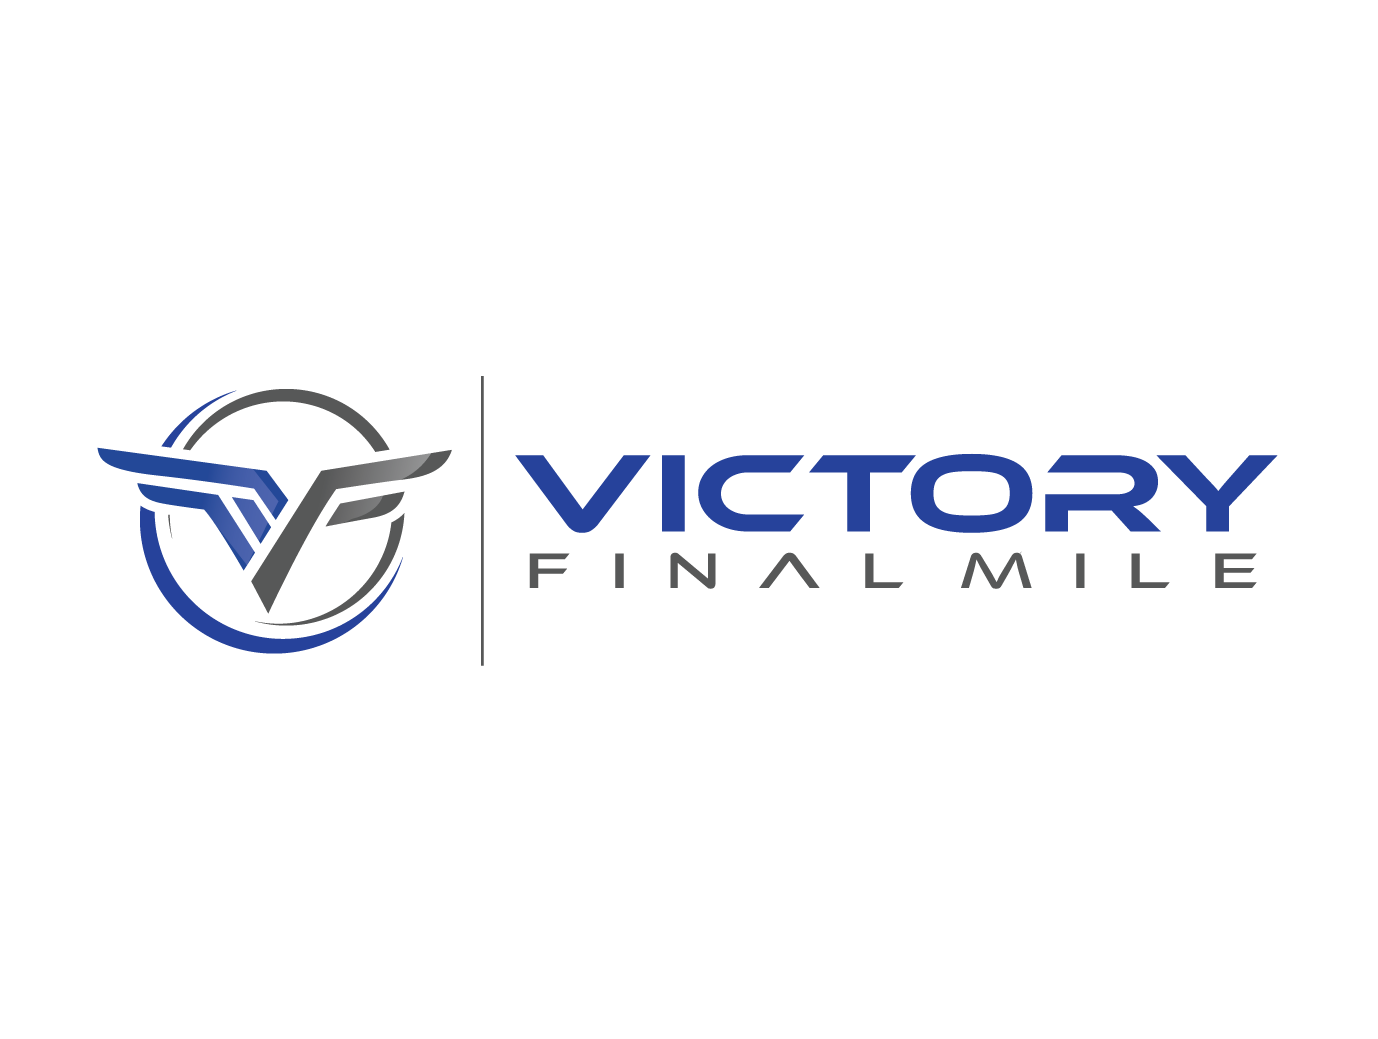 Victory Final Mile